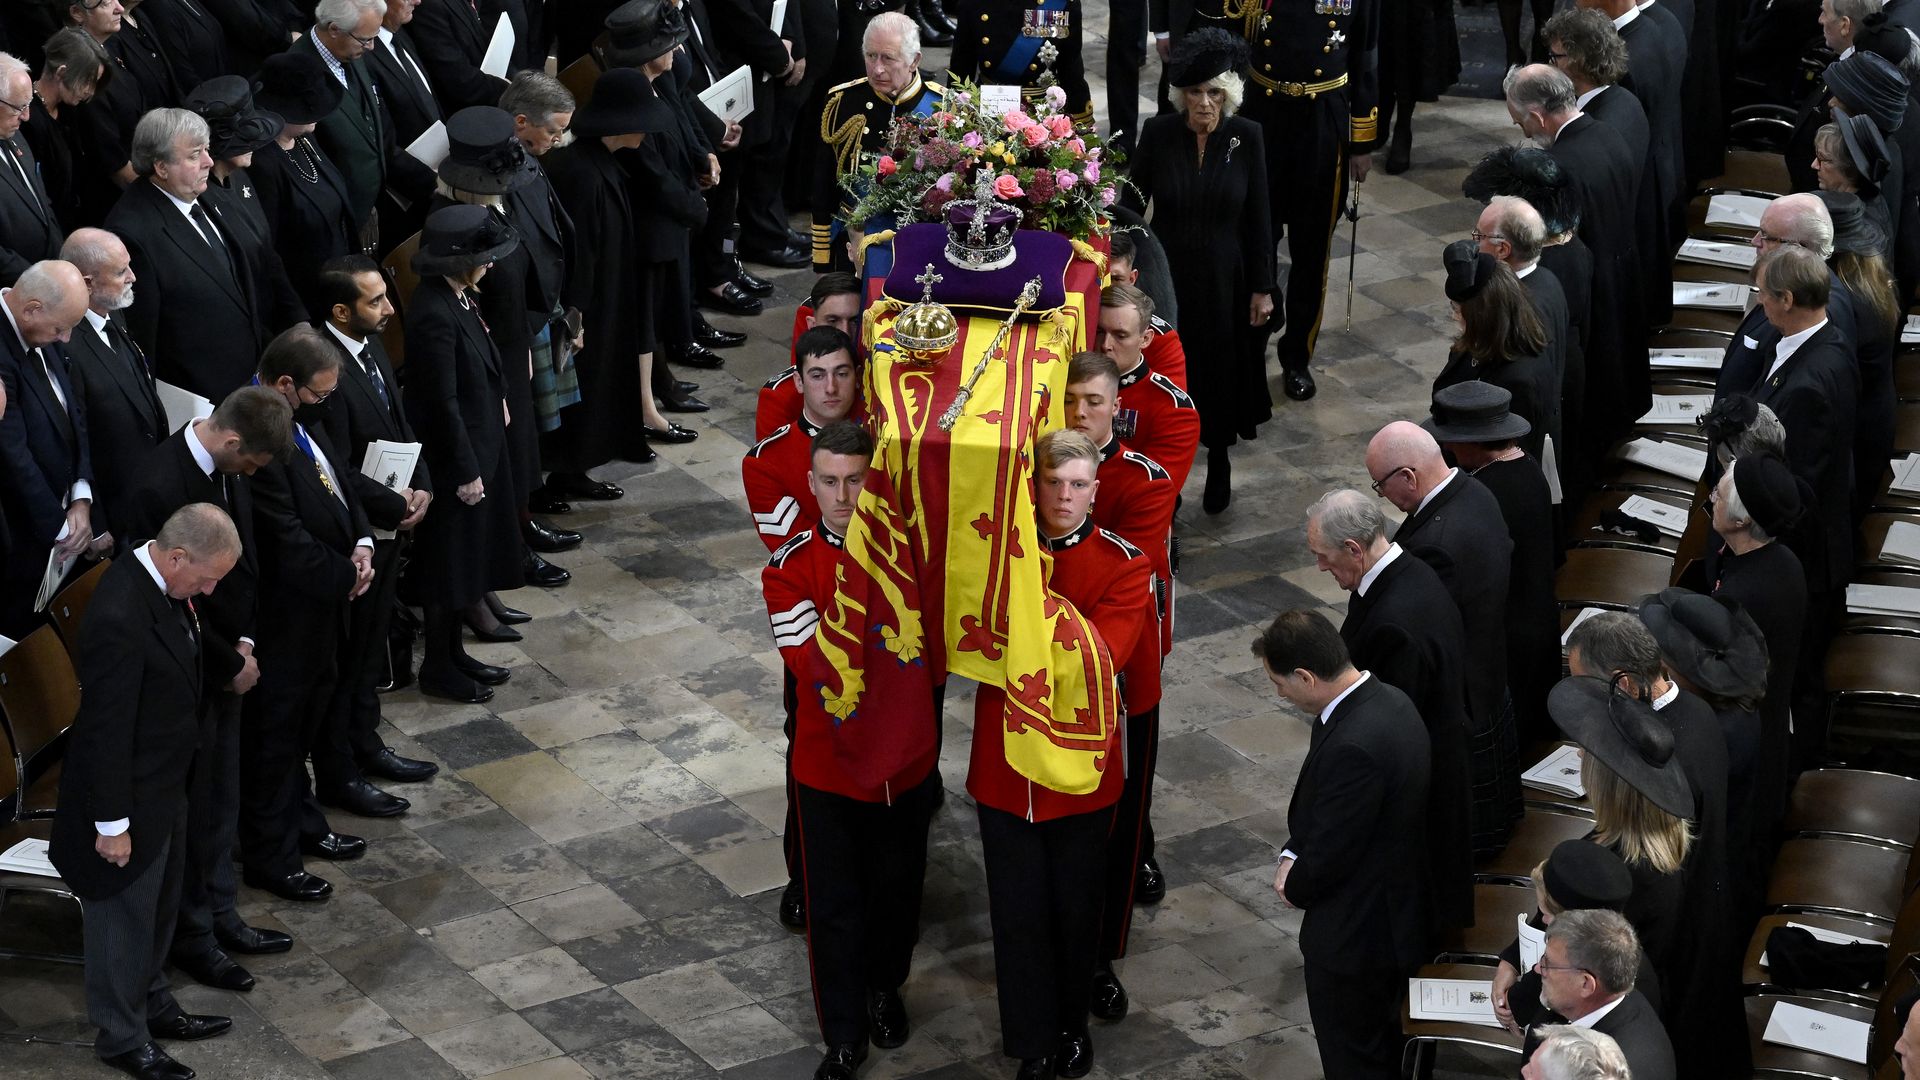 The coffin of Queen Elizabeth II with the Imperial State Crown resting on top of it departs Westminster Abbey during the state funeral of Queen Elizabeth II.